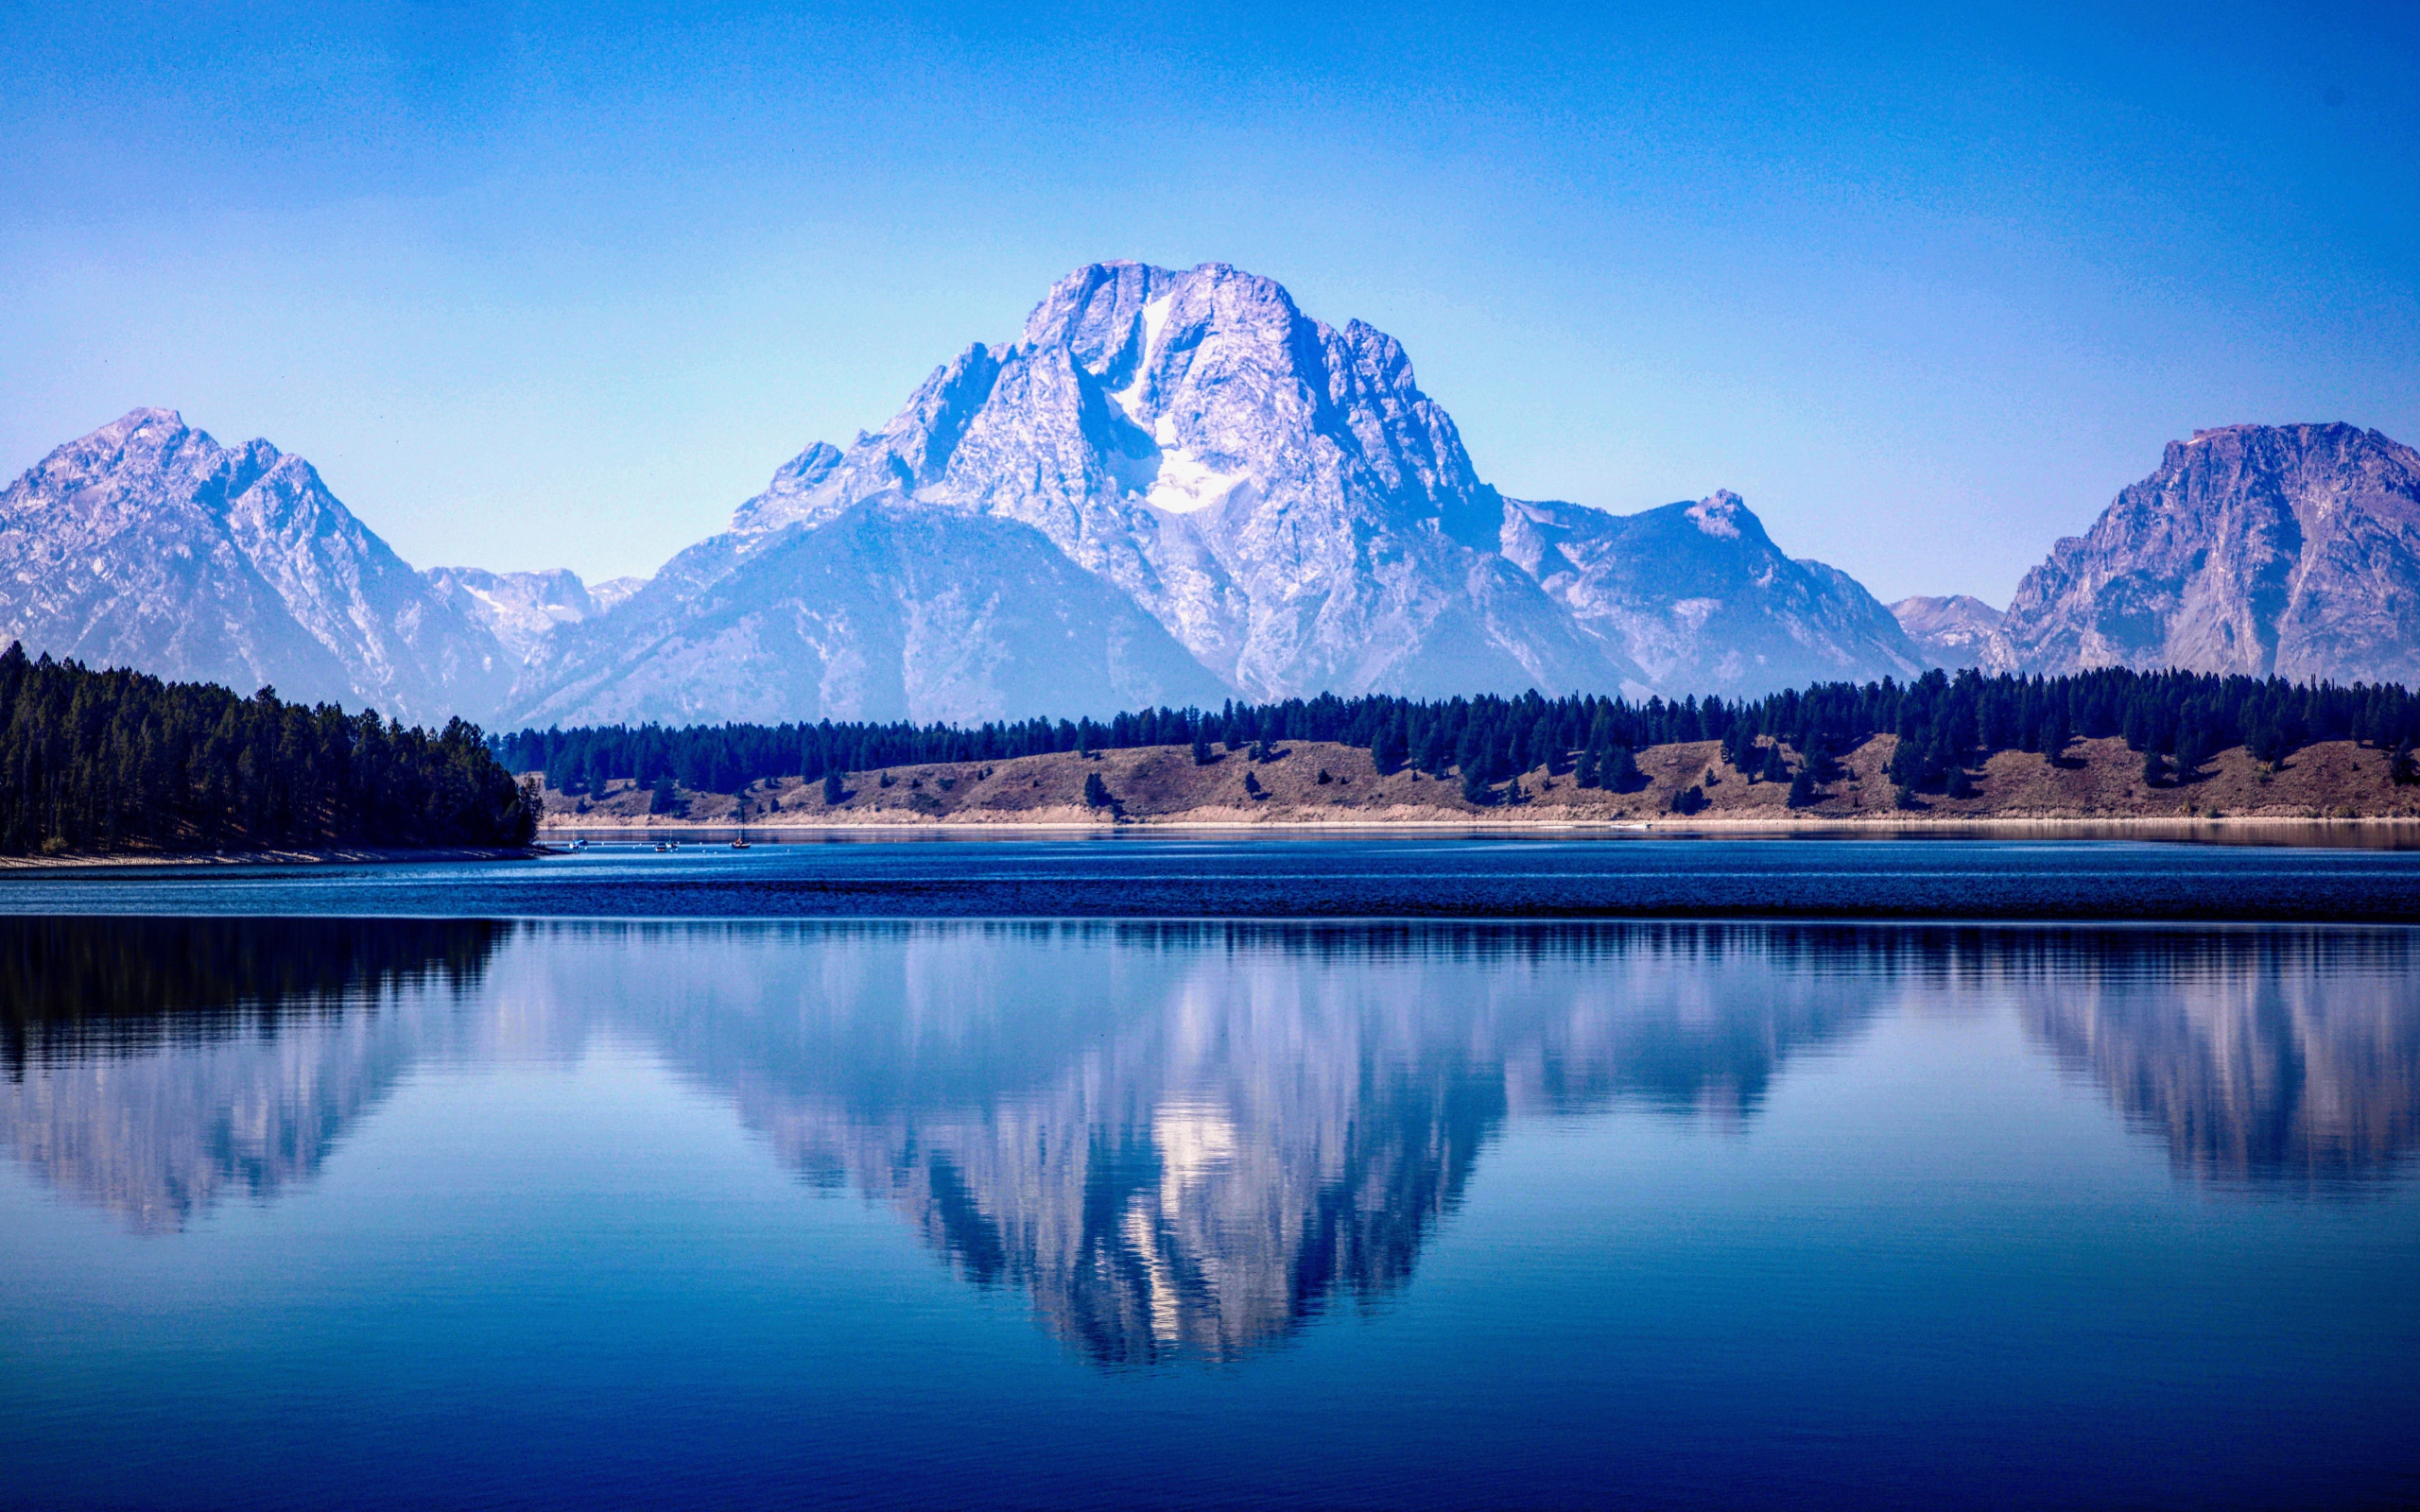 High mountains are reflected in a lake under a blue sky